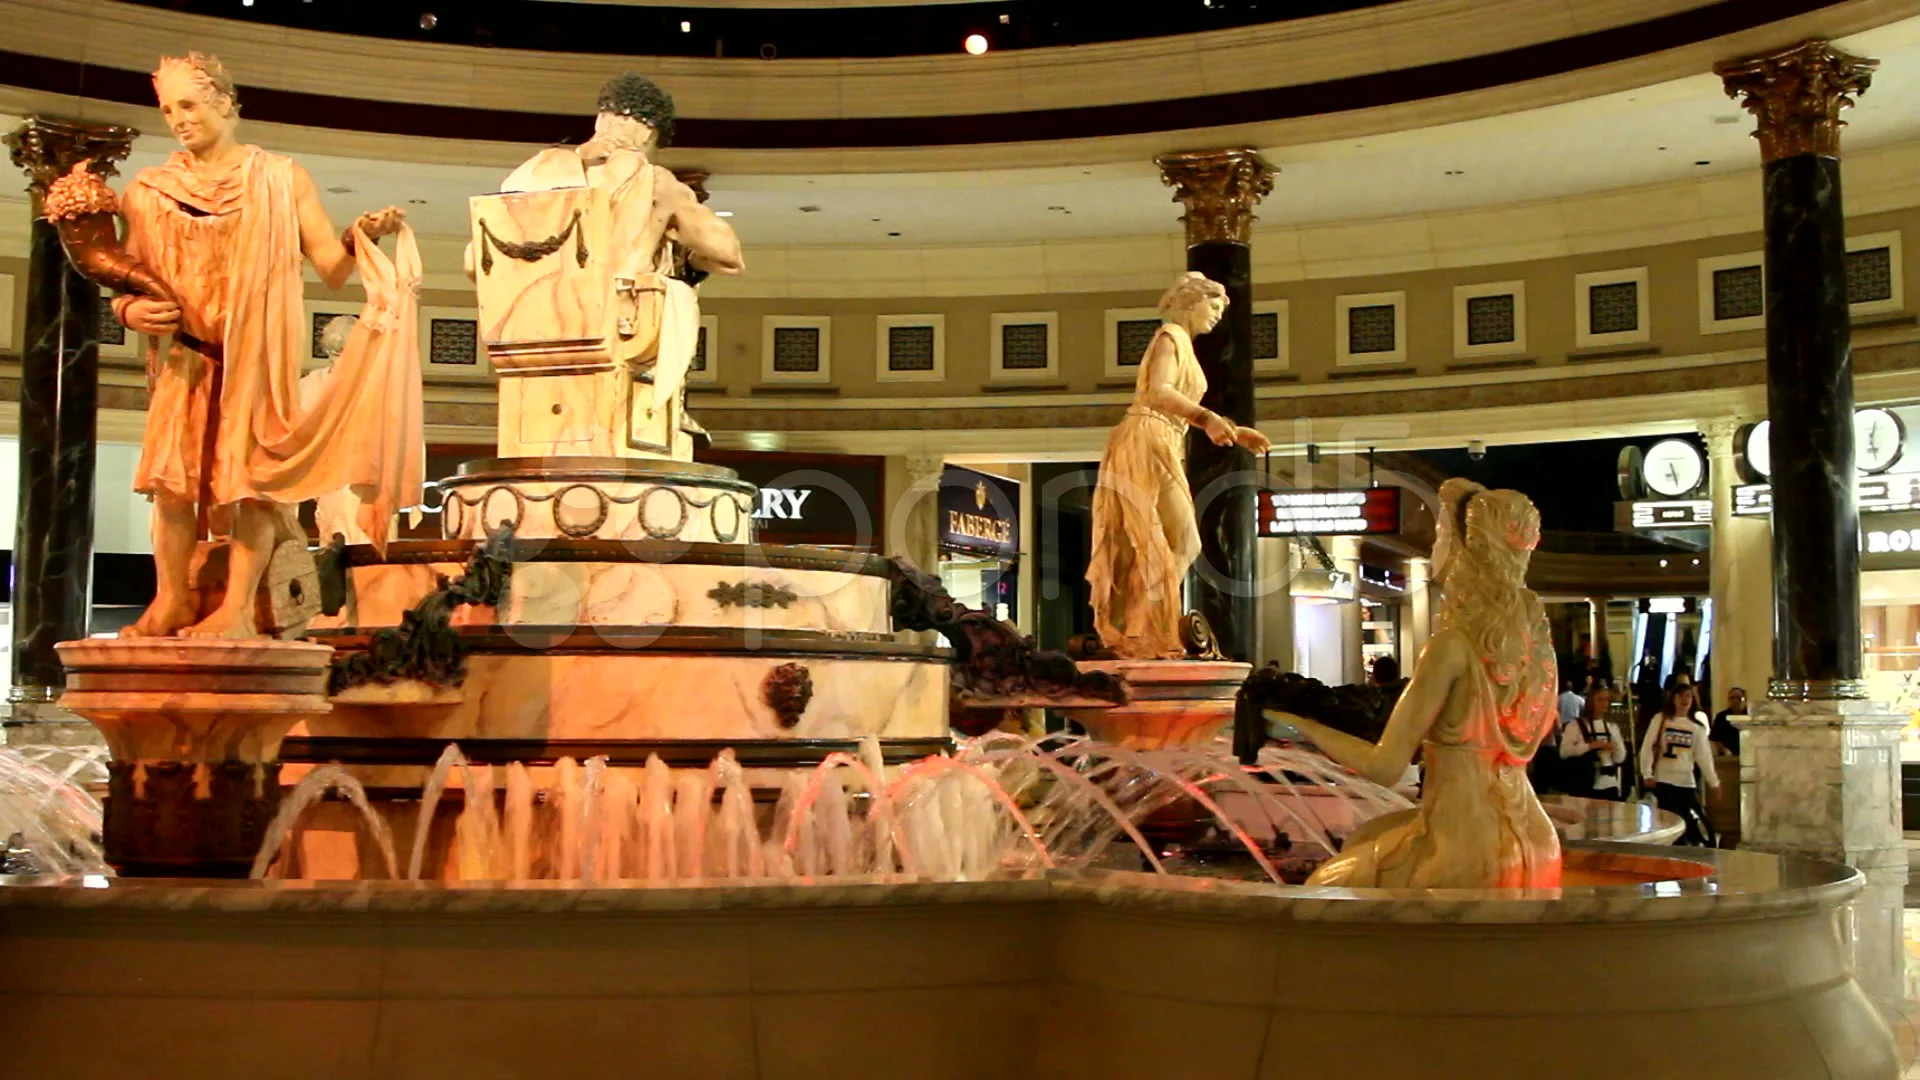 Fountain of the Gods inside Caesar's Pal, Stock Video